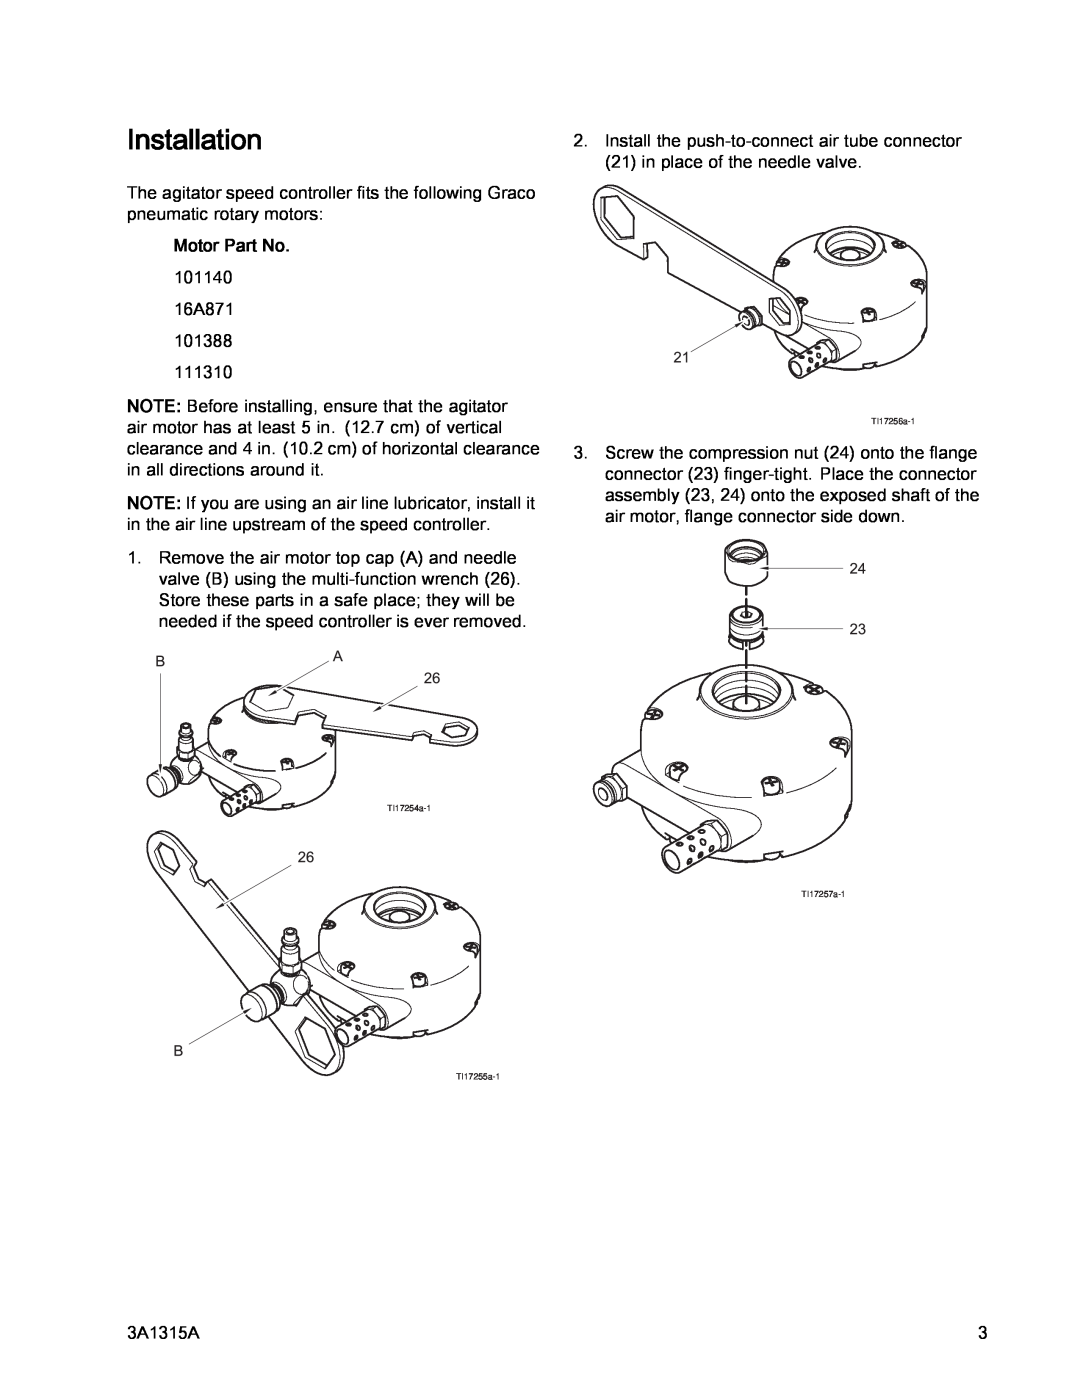 Graco 24G621, 3A1315A important safety instructions Installation, Motor Part No 